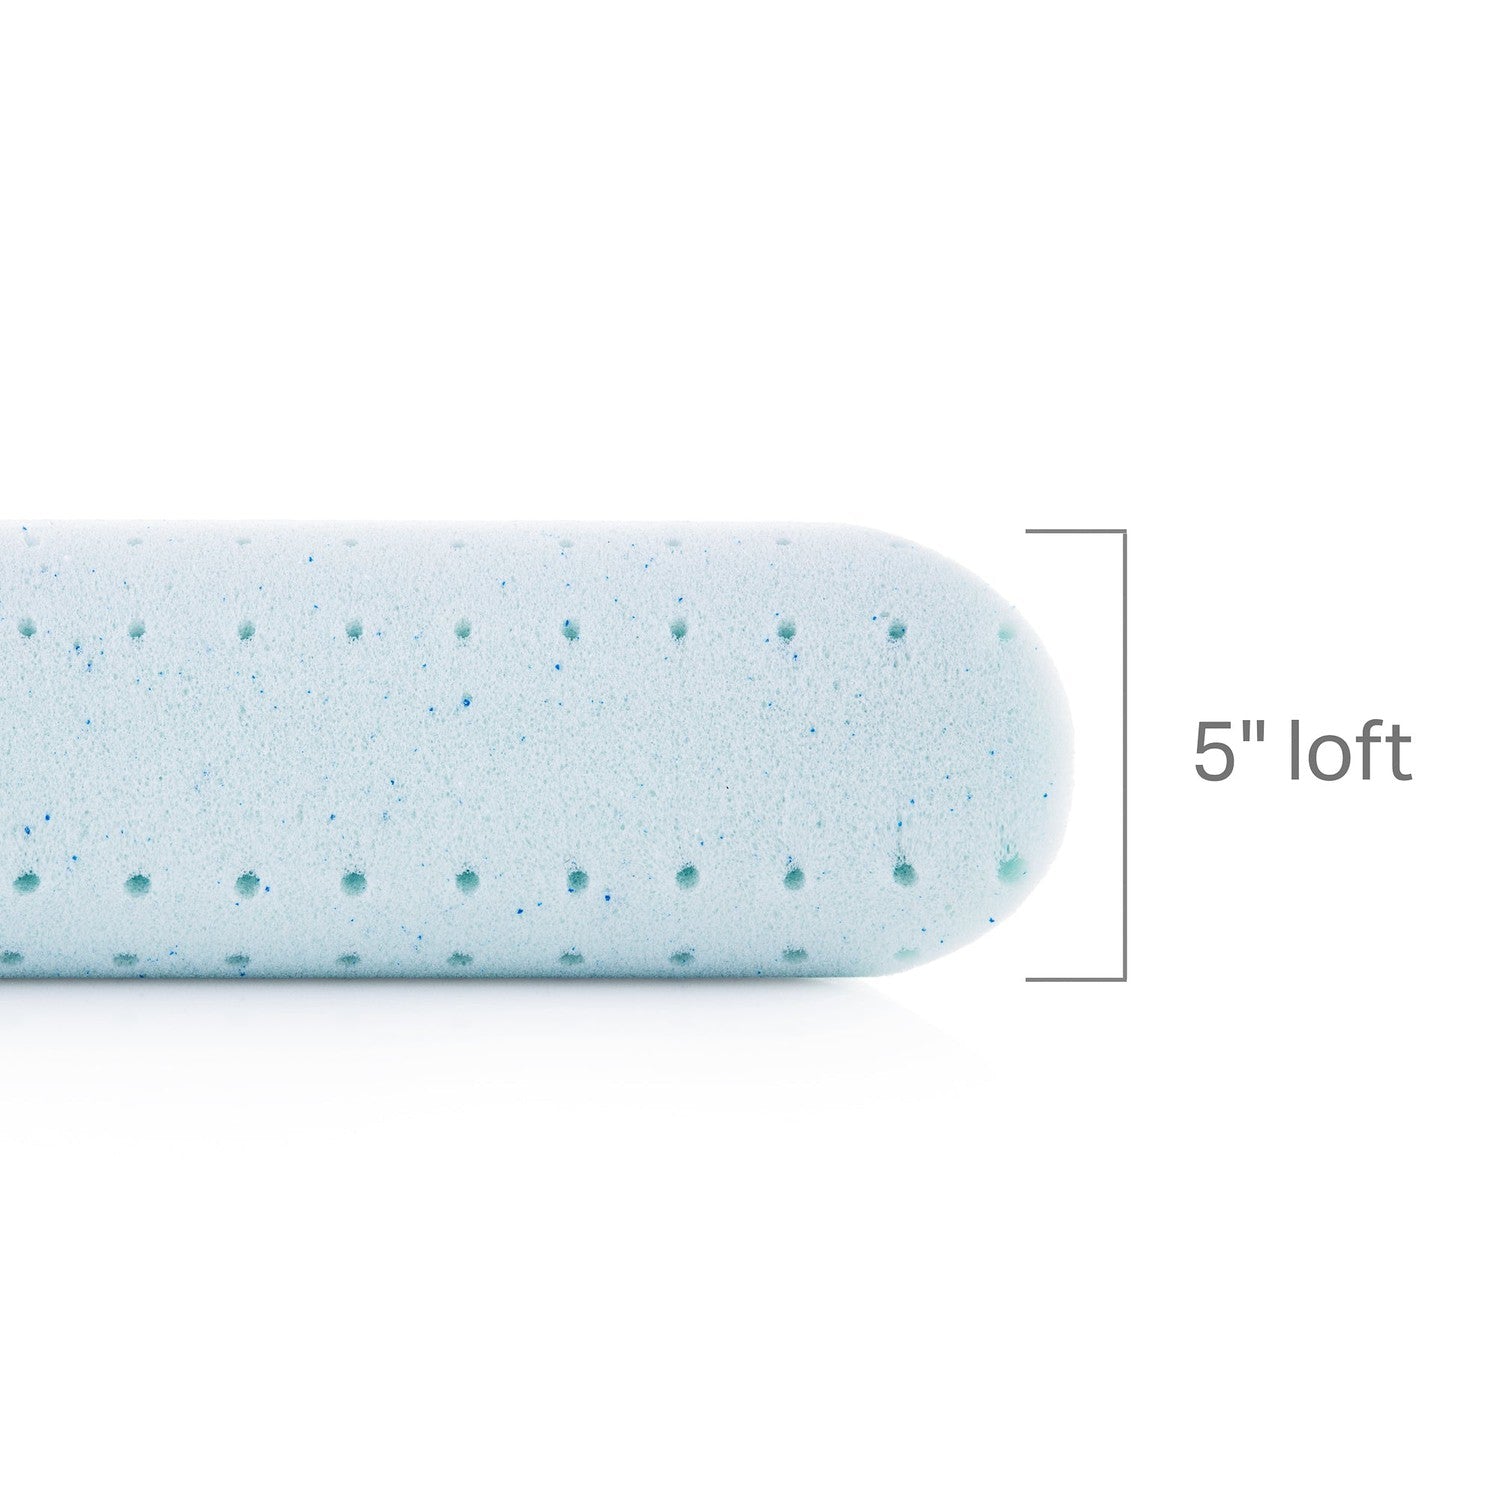 Weekender Gel Memory Foam Pillow + Reversible Cooling Cover-Purely Relaxation